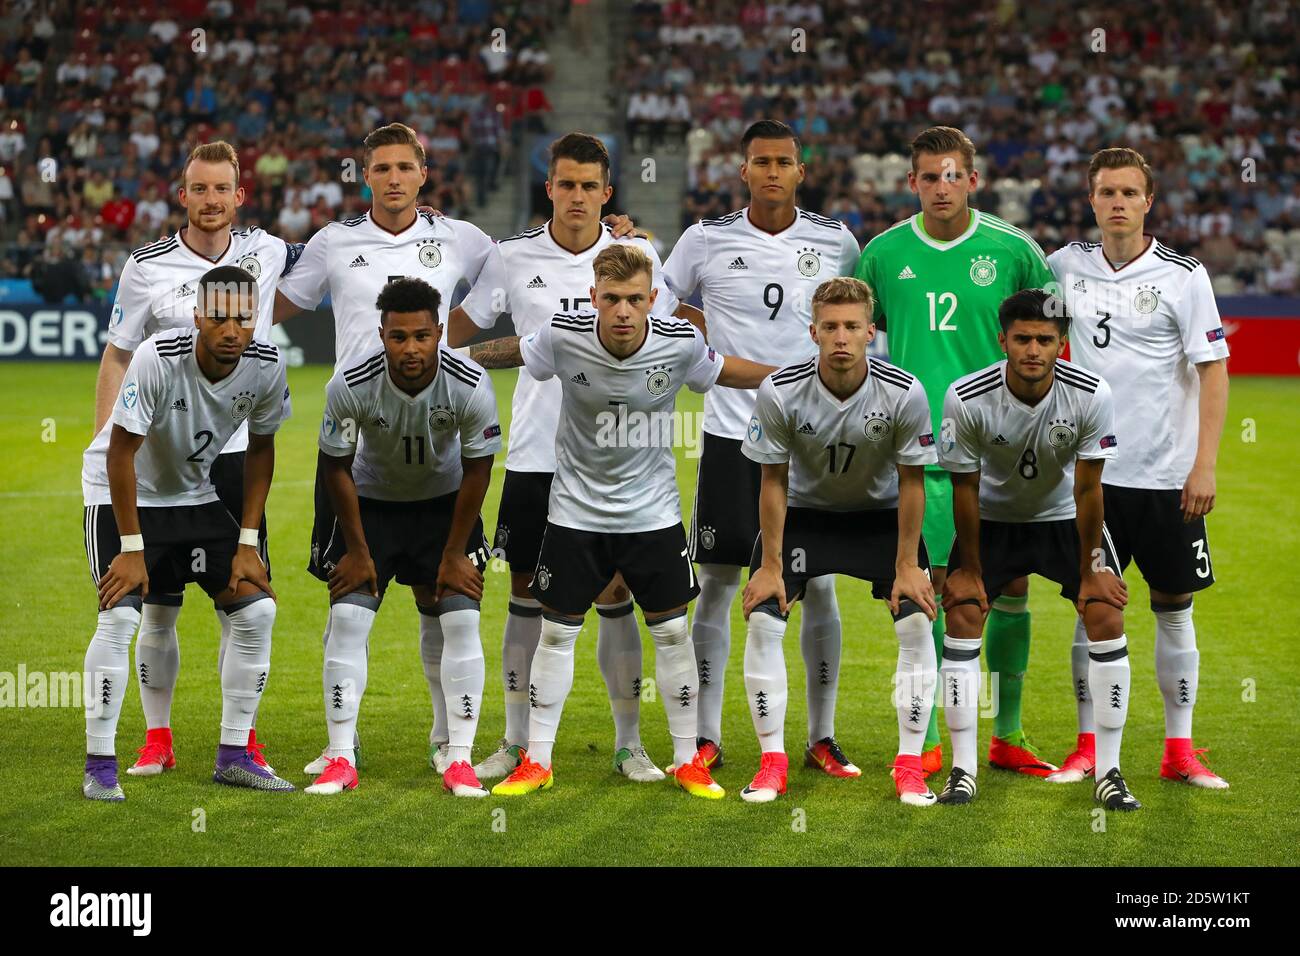 Germany team group shot. Top Row (left to right) Maximilian Arnold, Niklas Stark, Marc-Oliver Kempf, Davie Selke, Julian Pollersbeck and Yannick Gerhardt. Bottom Row (left to right) Jeremy Toljan, Serge Gnabry, Max Meyer, Mitchell Weiser and Mahmoud Dahoud Stock Photo